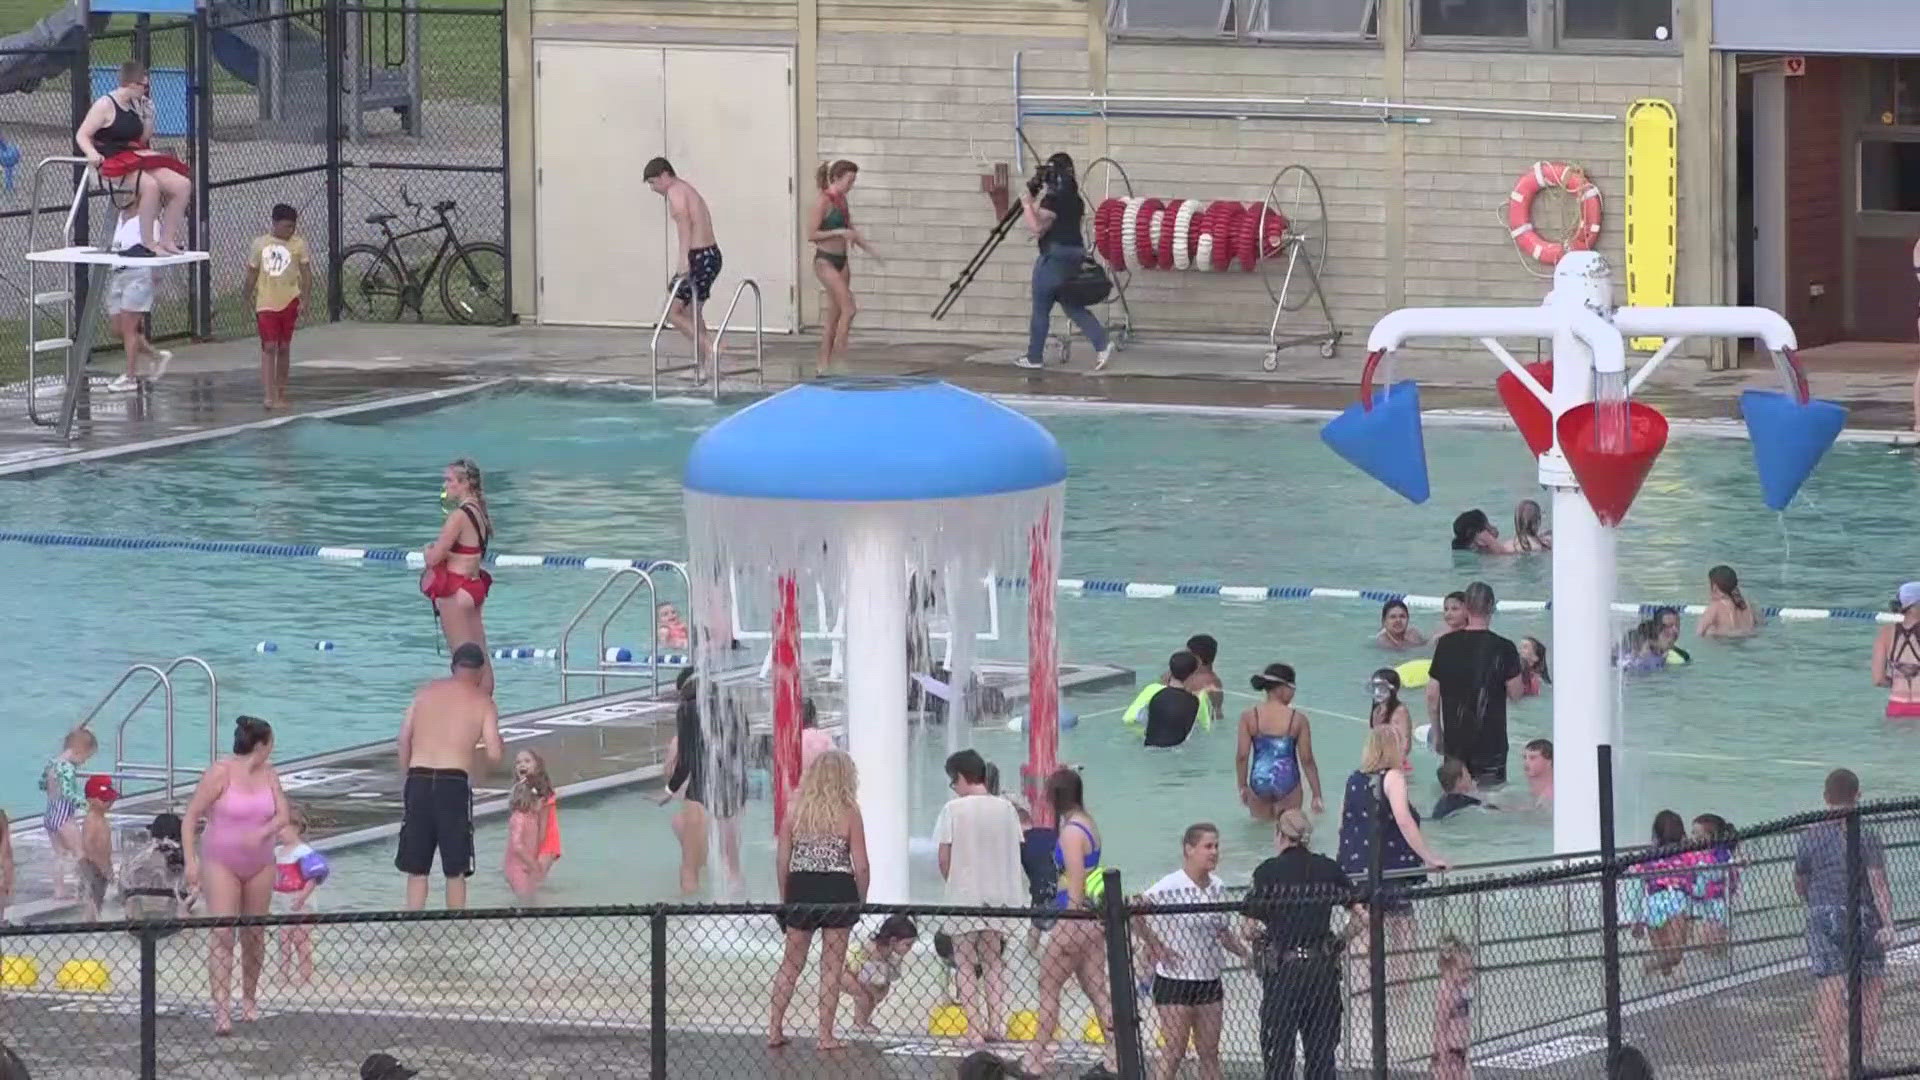 Residents in Greater Bangor are diving into the city’s two community pools following the facilities opening for the summer season Wednesday.